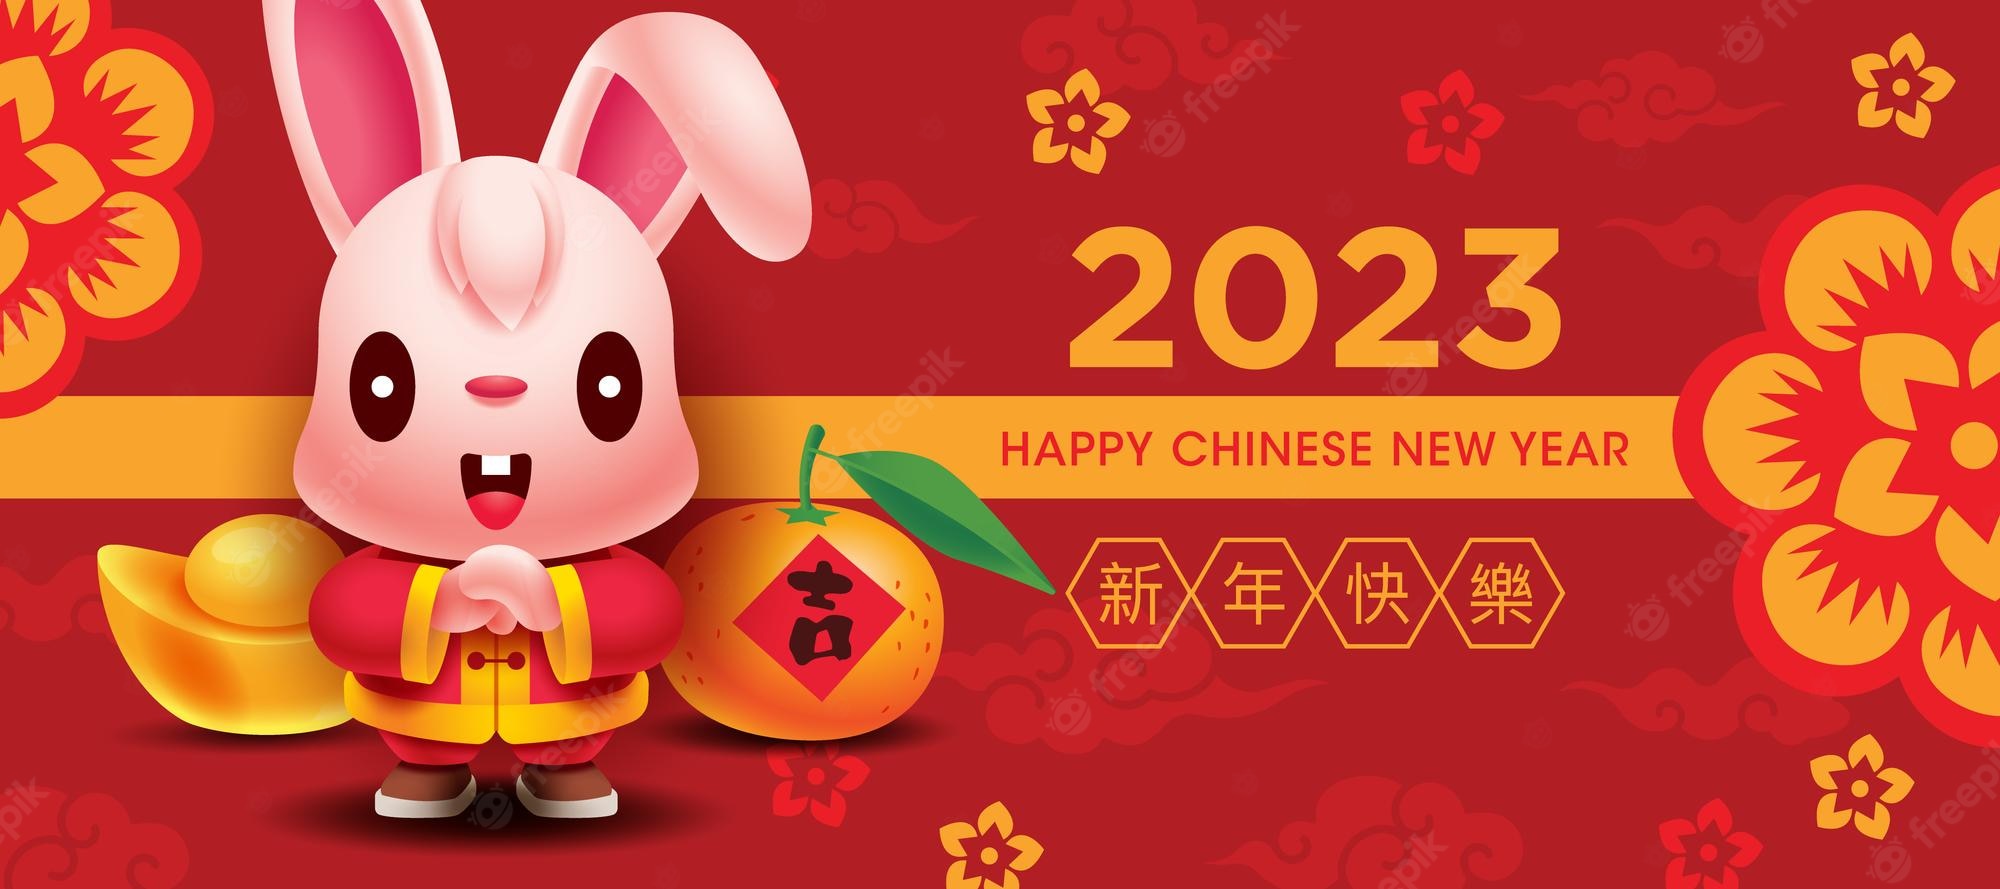 2023-chinese-new-year-cute-rabbit-greeting-banner-with-gold-mandarin-orange-red-background_438266-587